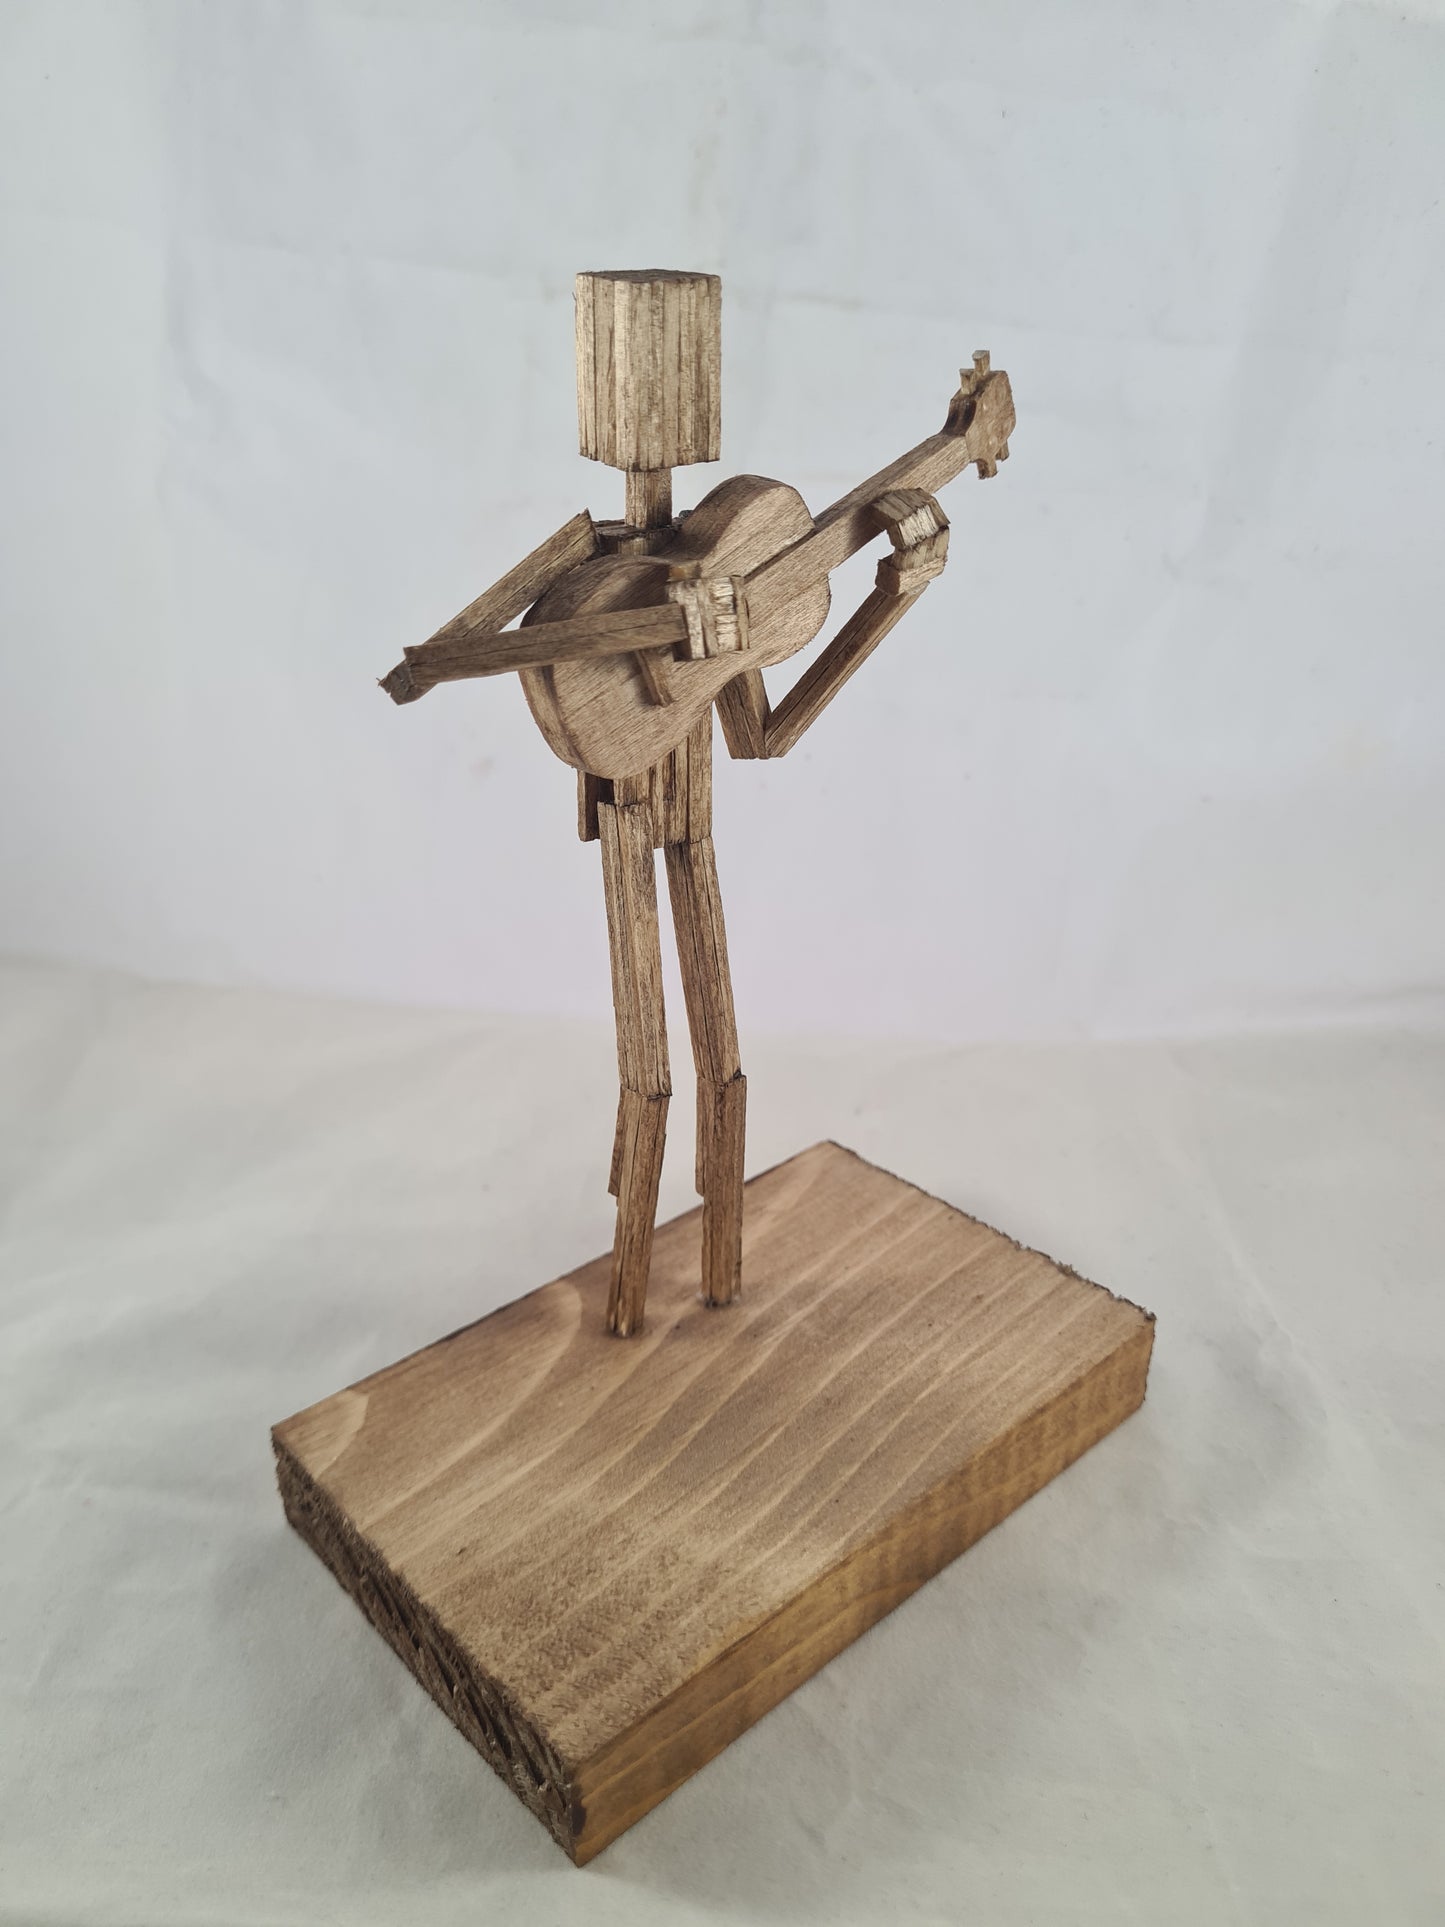 You can Ukulele too! - Handcrafted Wooden Matchstick Figures - Gifts, Ornaments and Decor By Tiggidy Designs